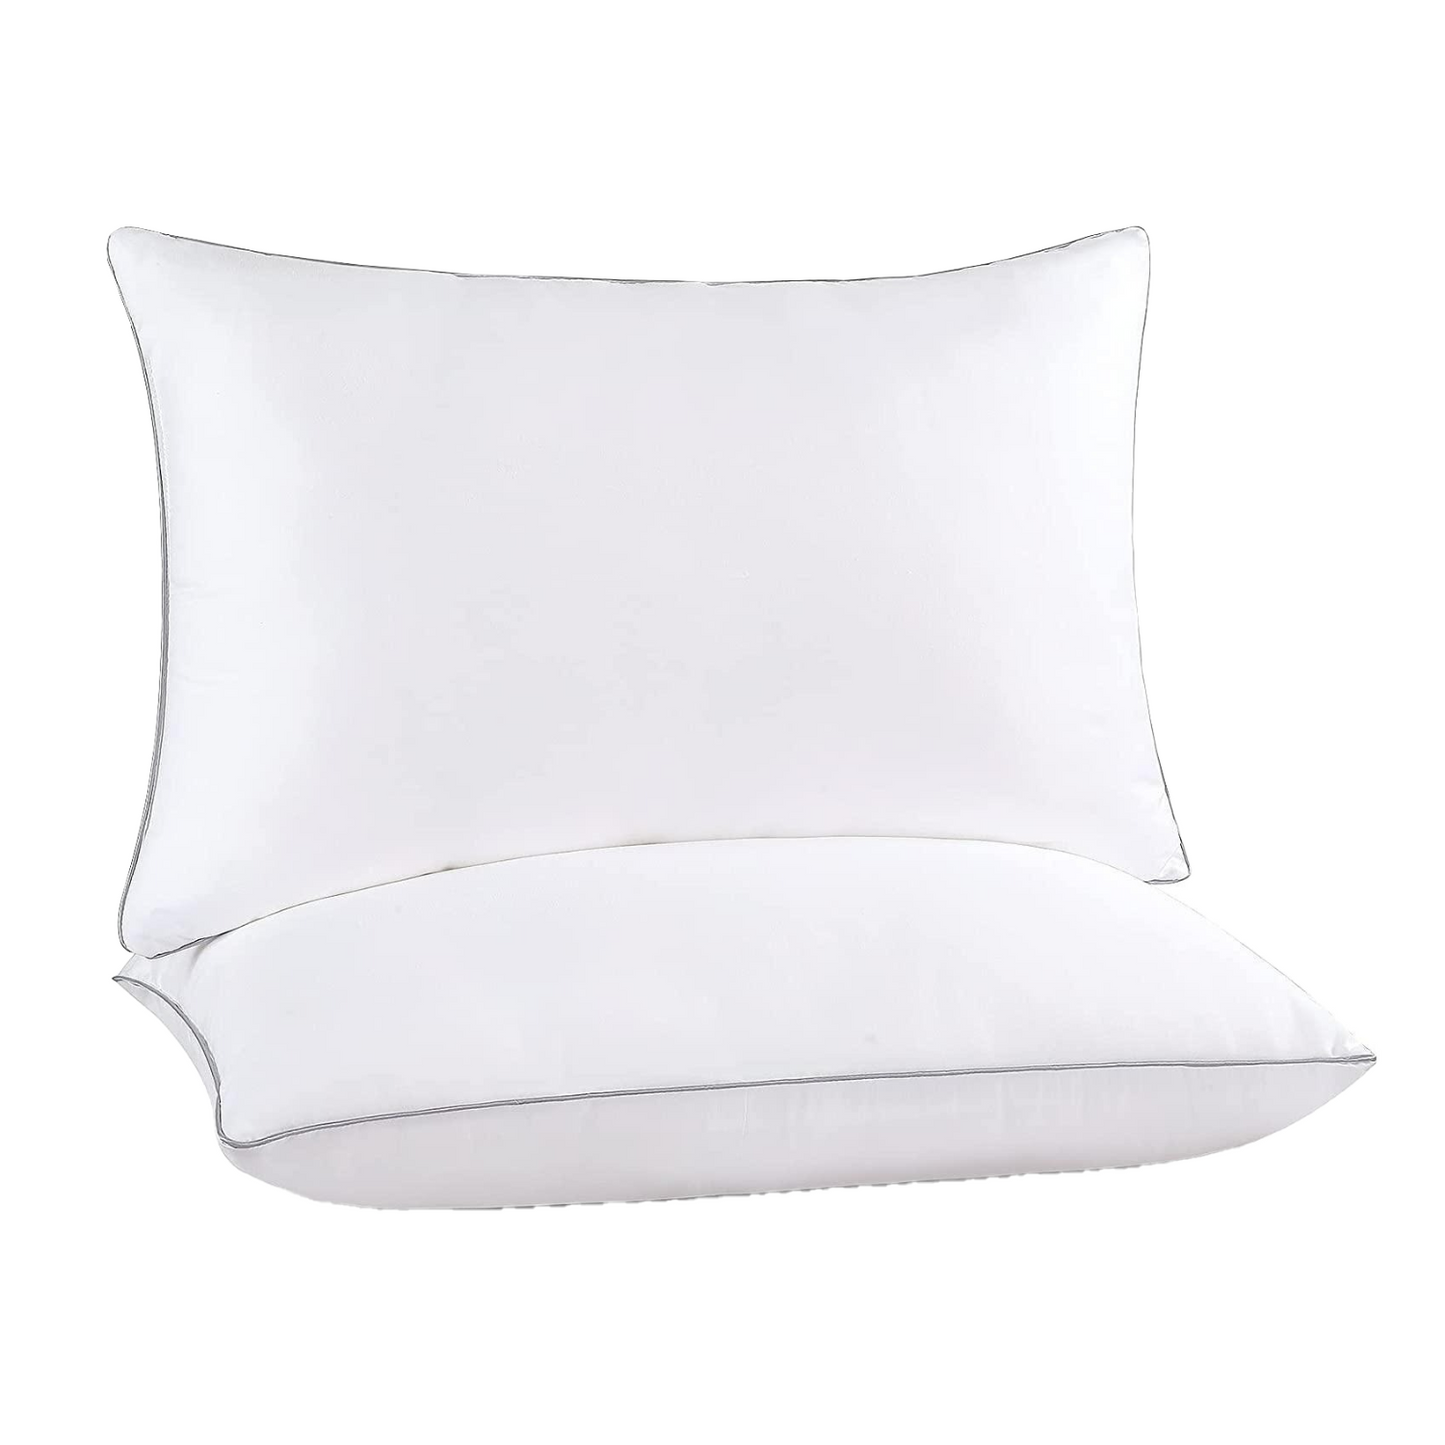 Piped Edge Pillow Set, White, Queen Size, 2 pc Set